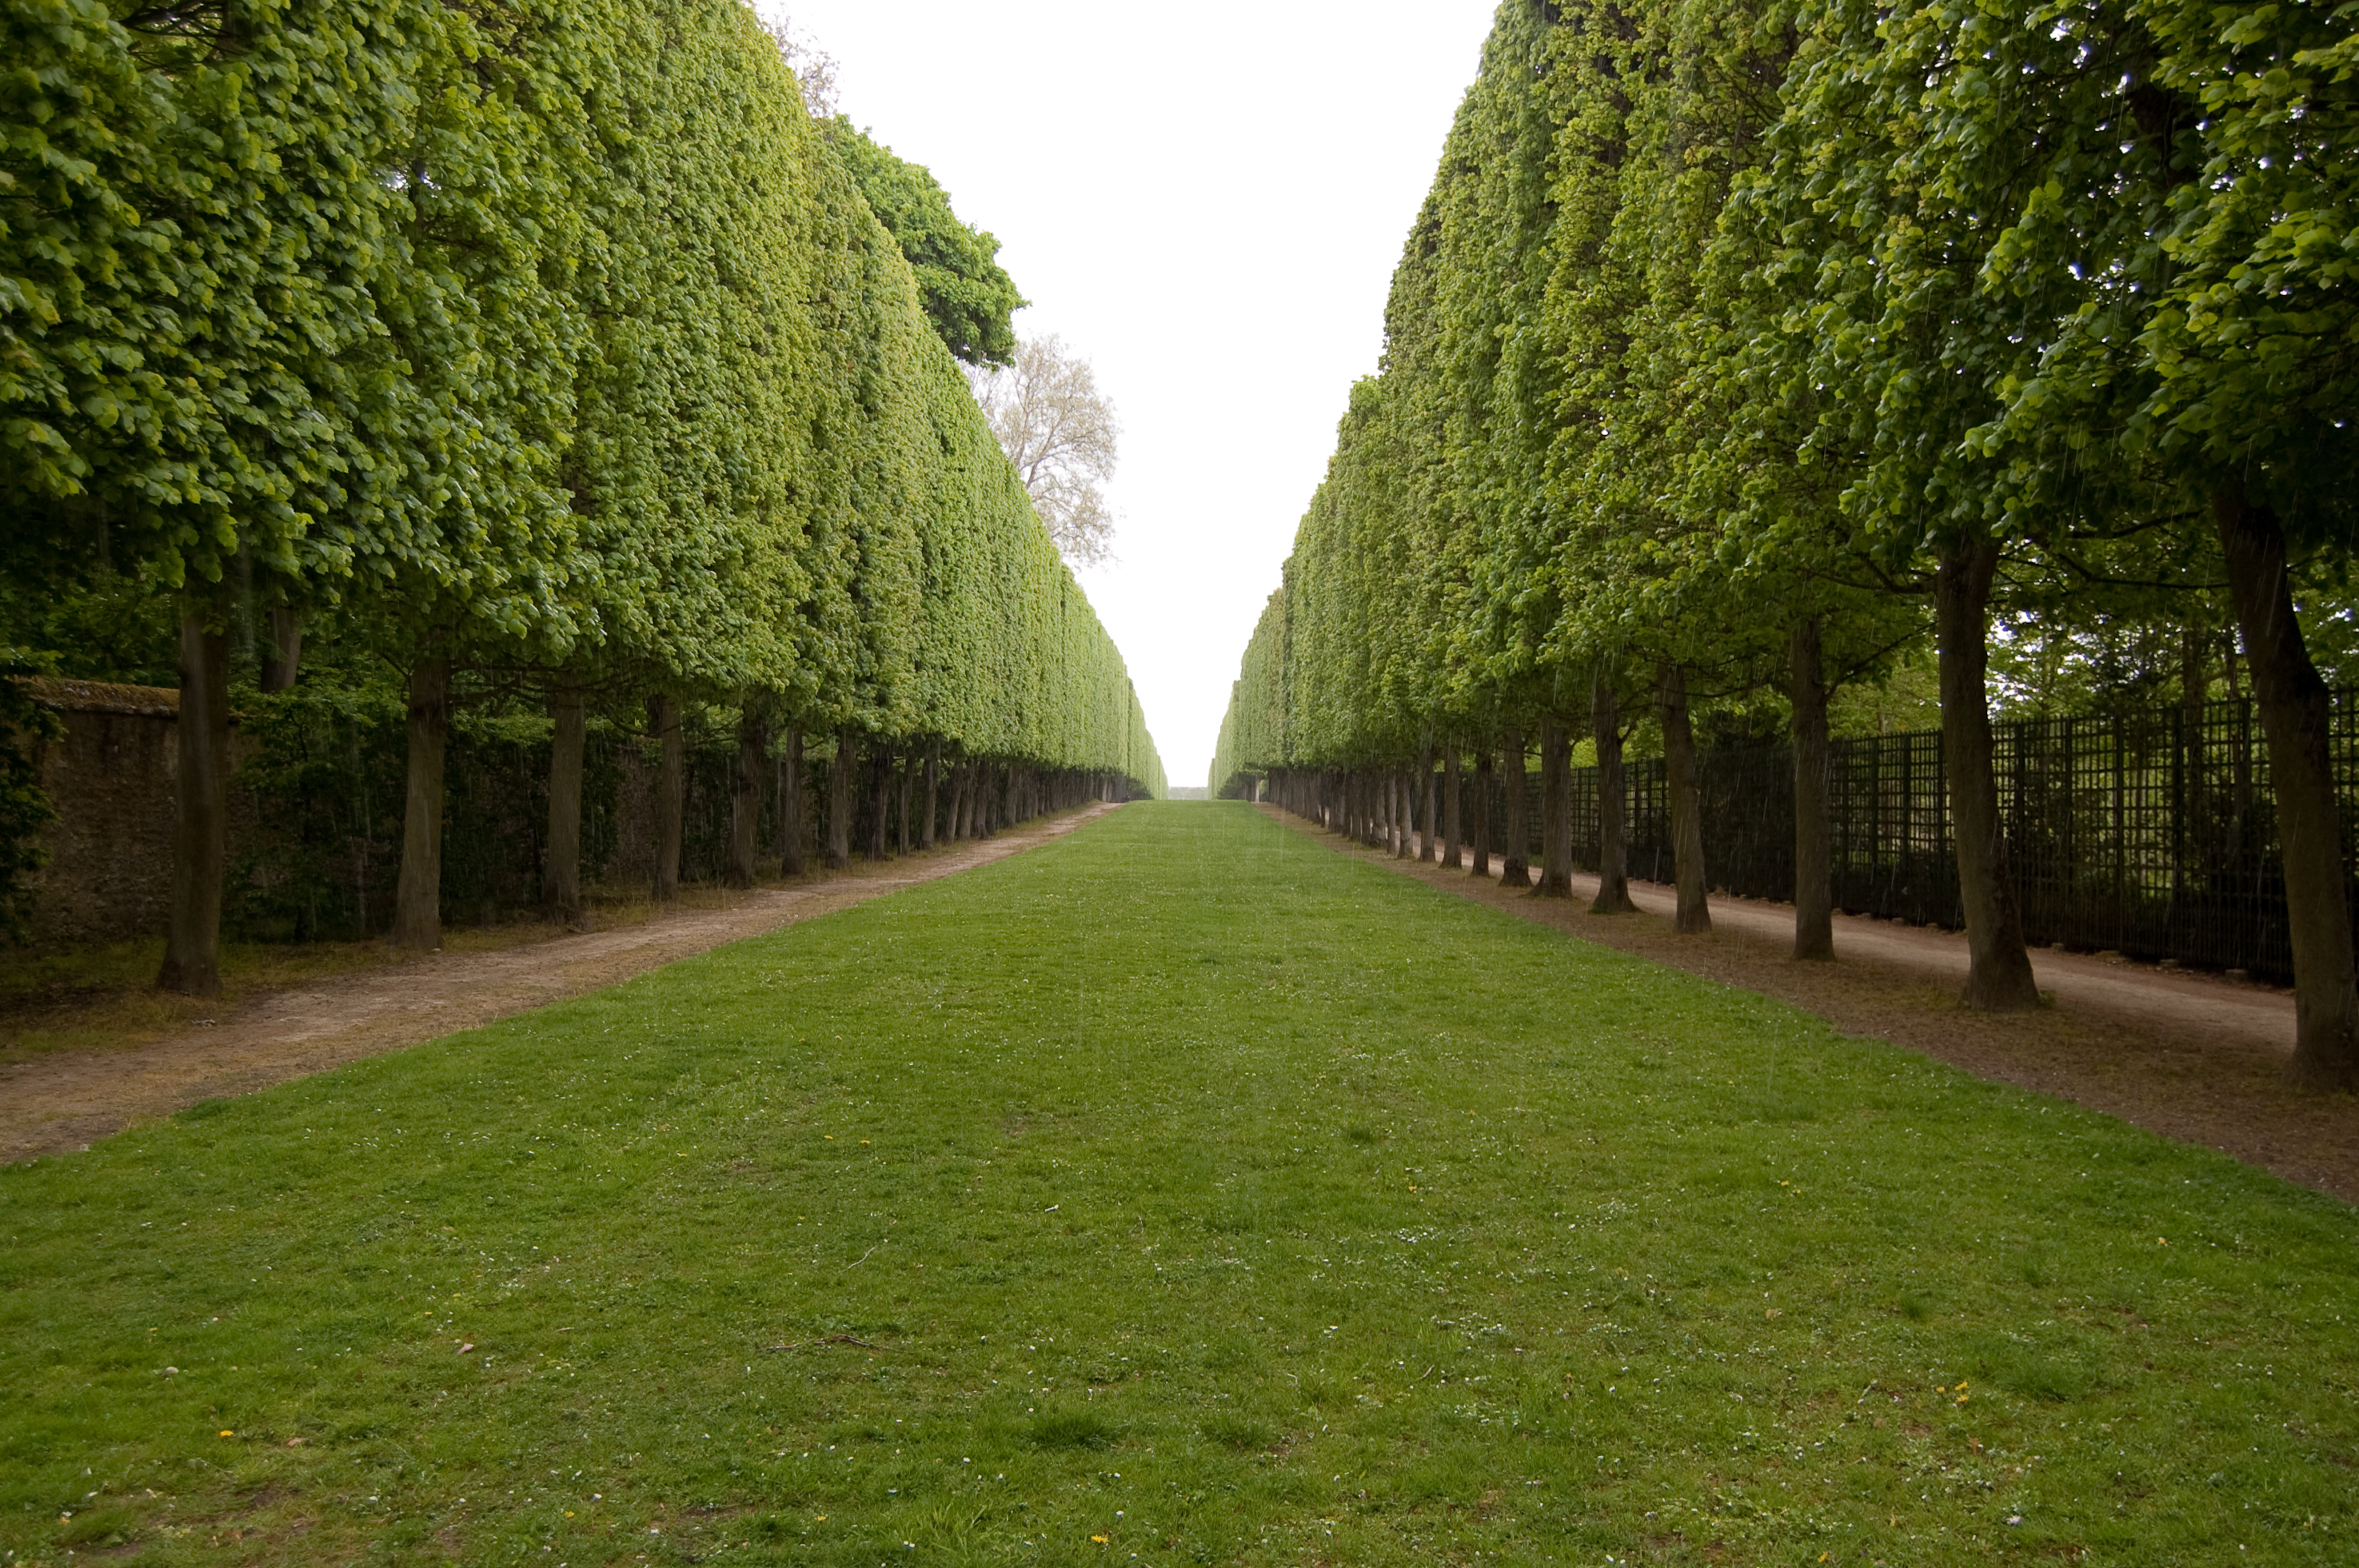 Image of one of the Allee's at Vesailles.